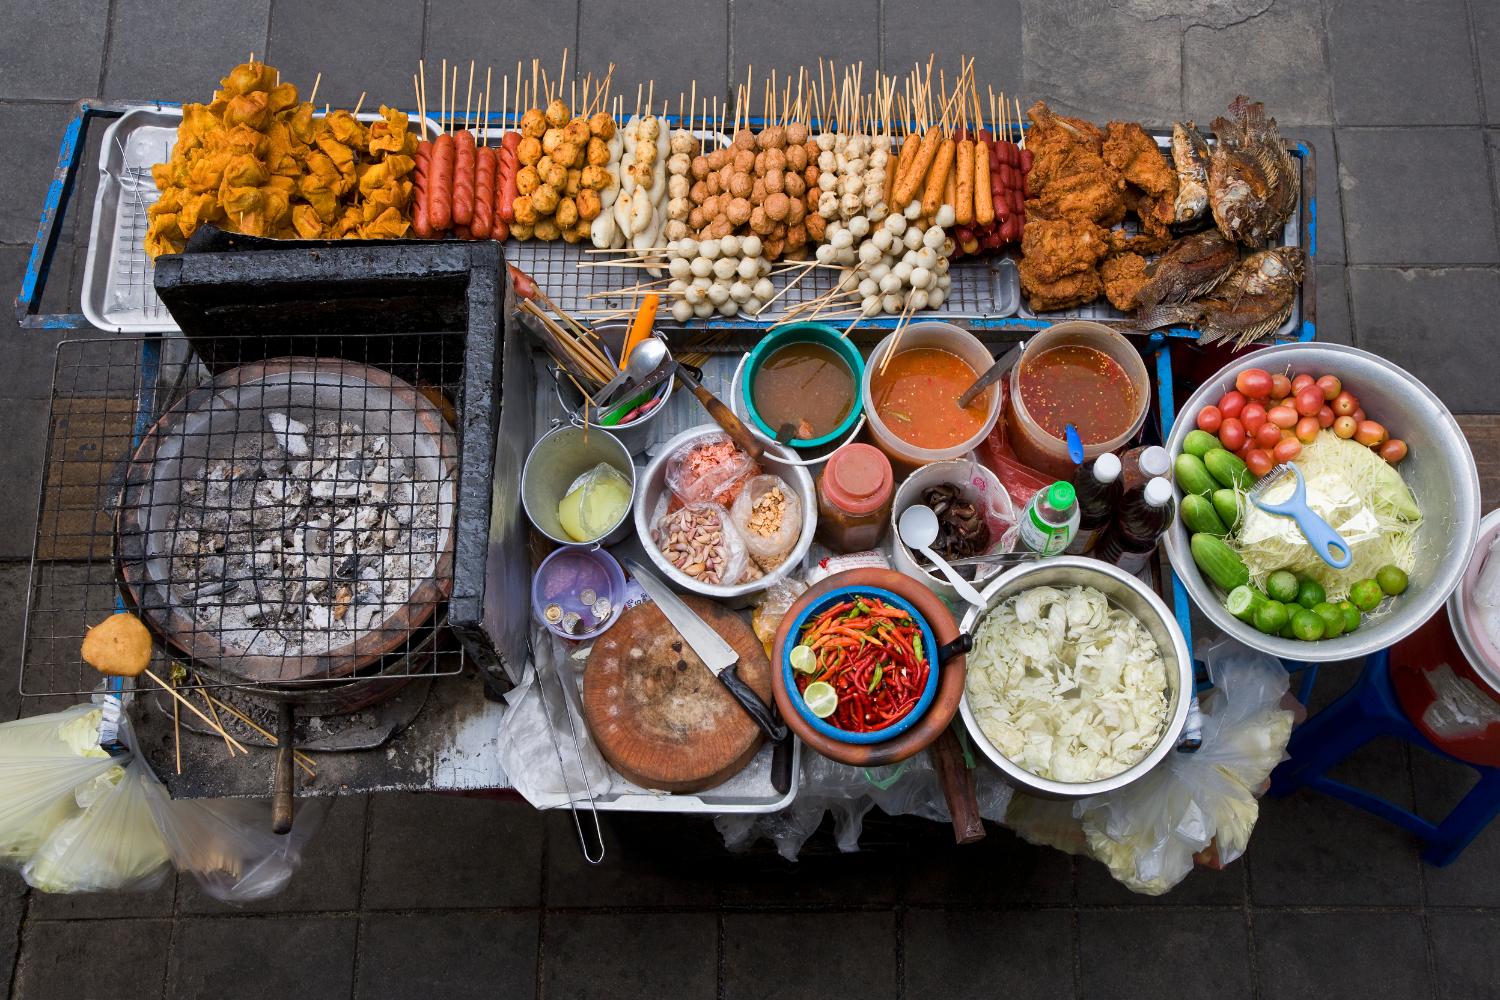 The 10 greatest cities for street food by The Daily Telegraph revealed